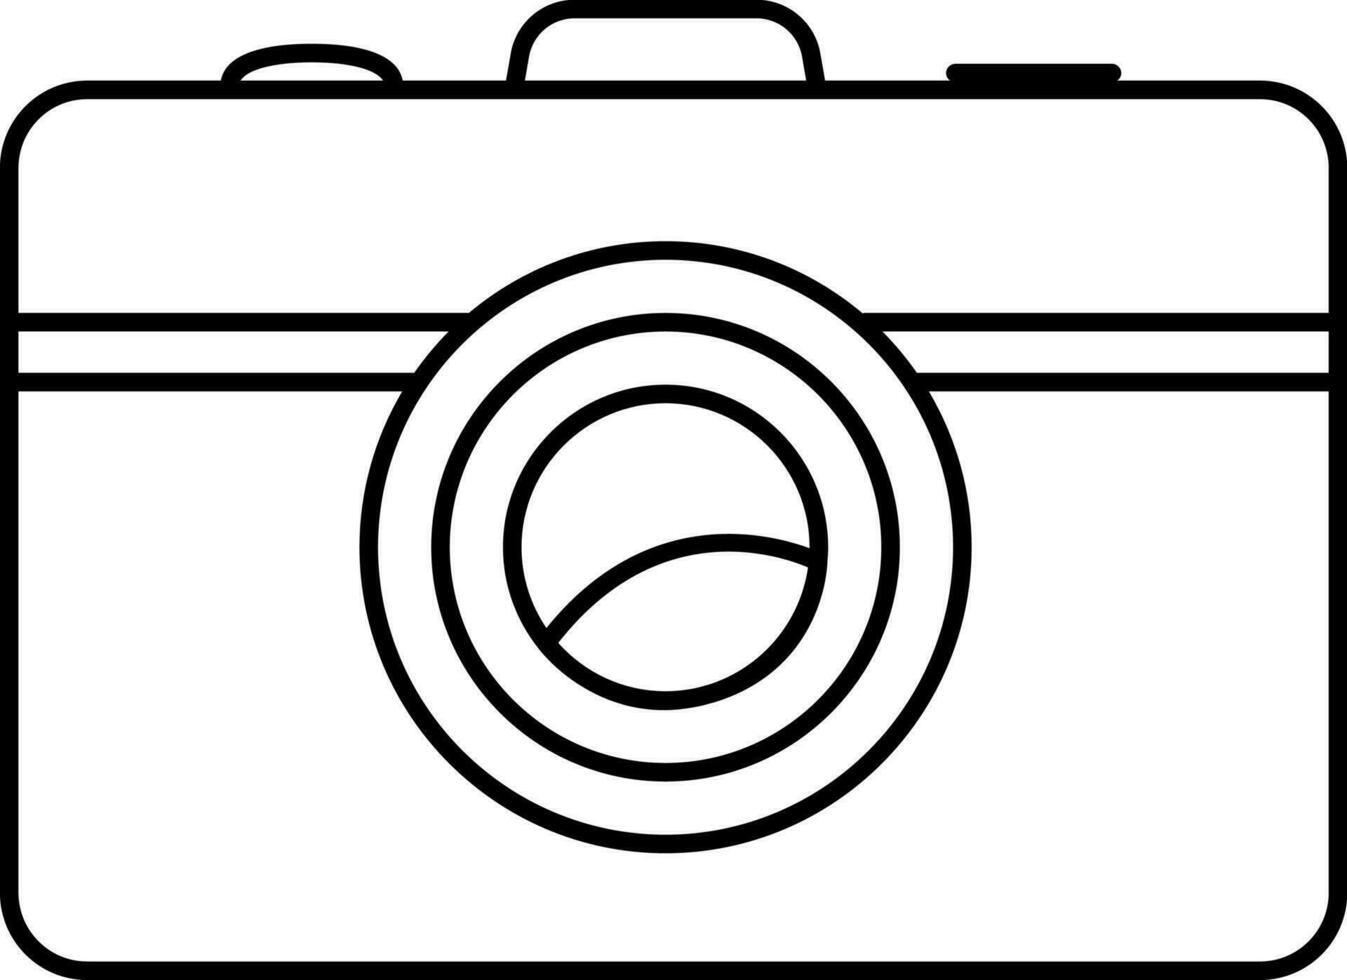 Flat style camera icon. vector